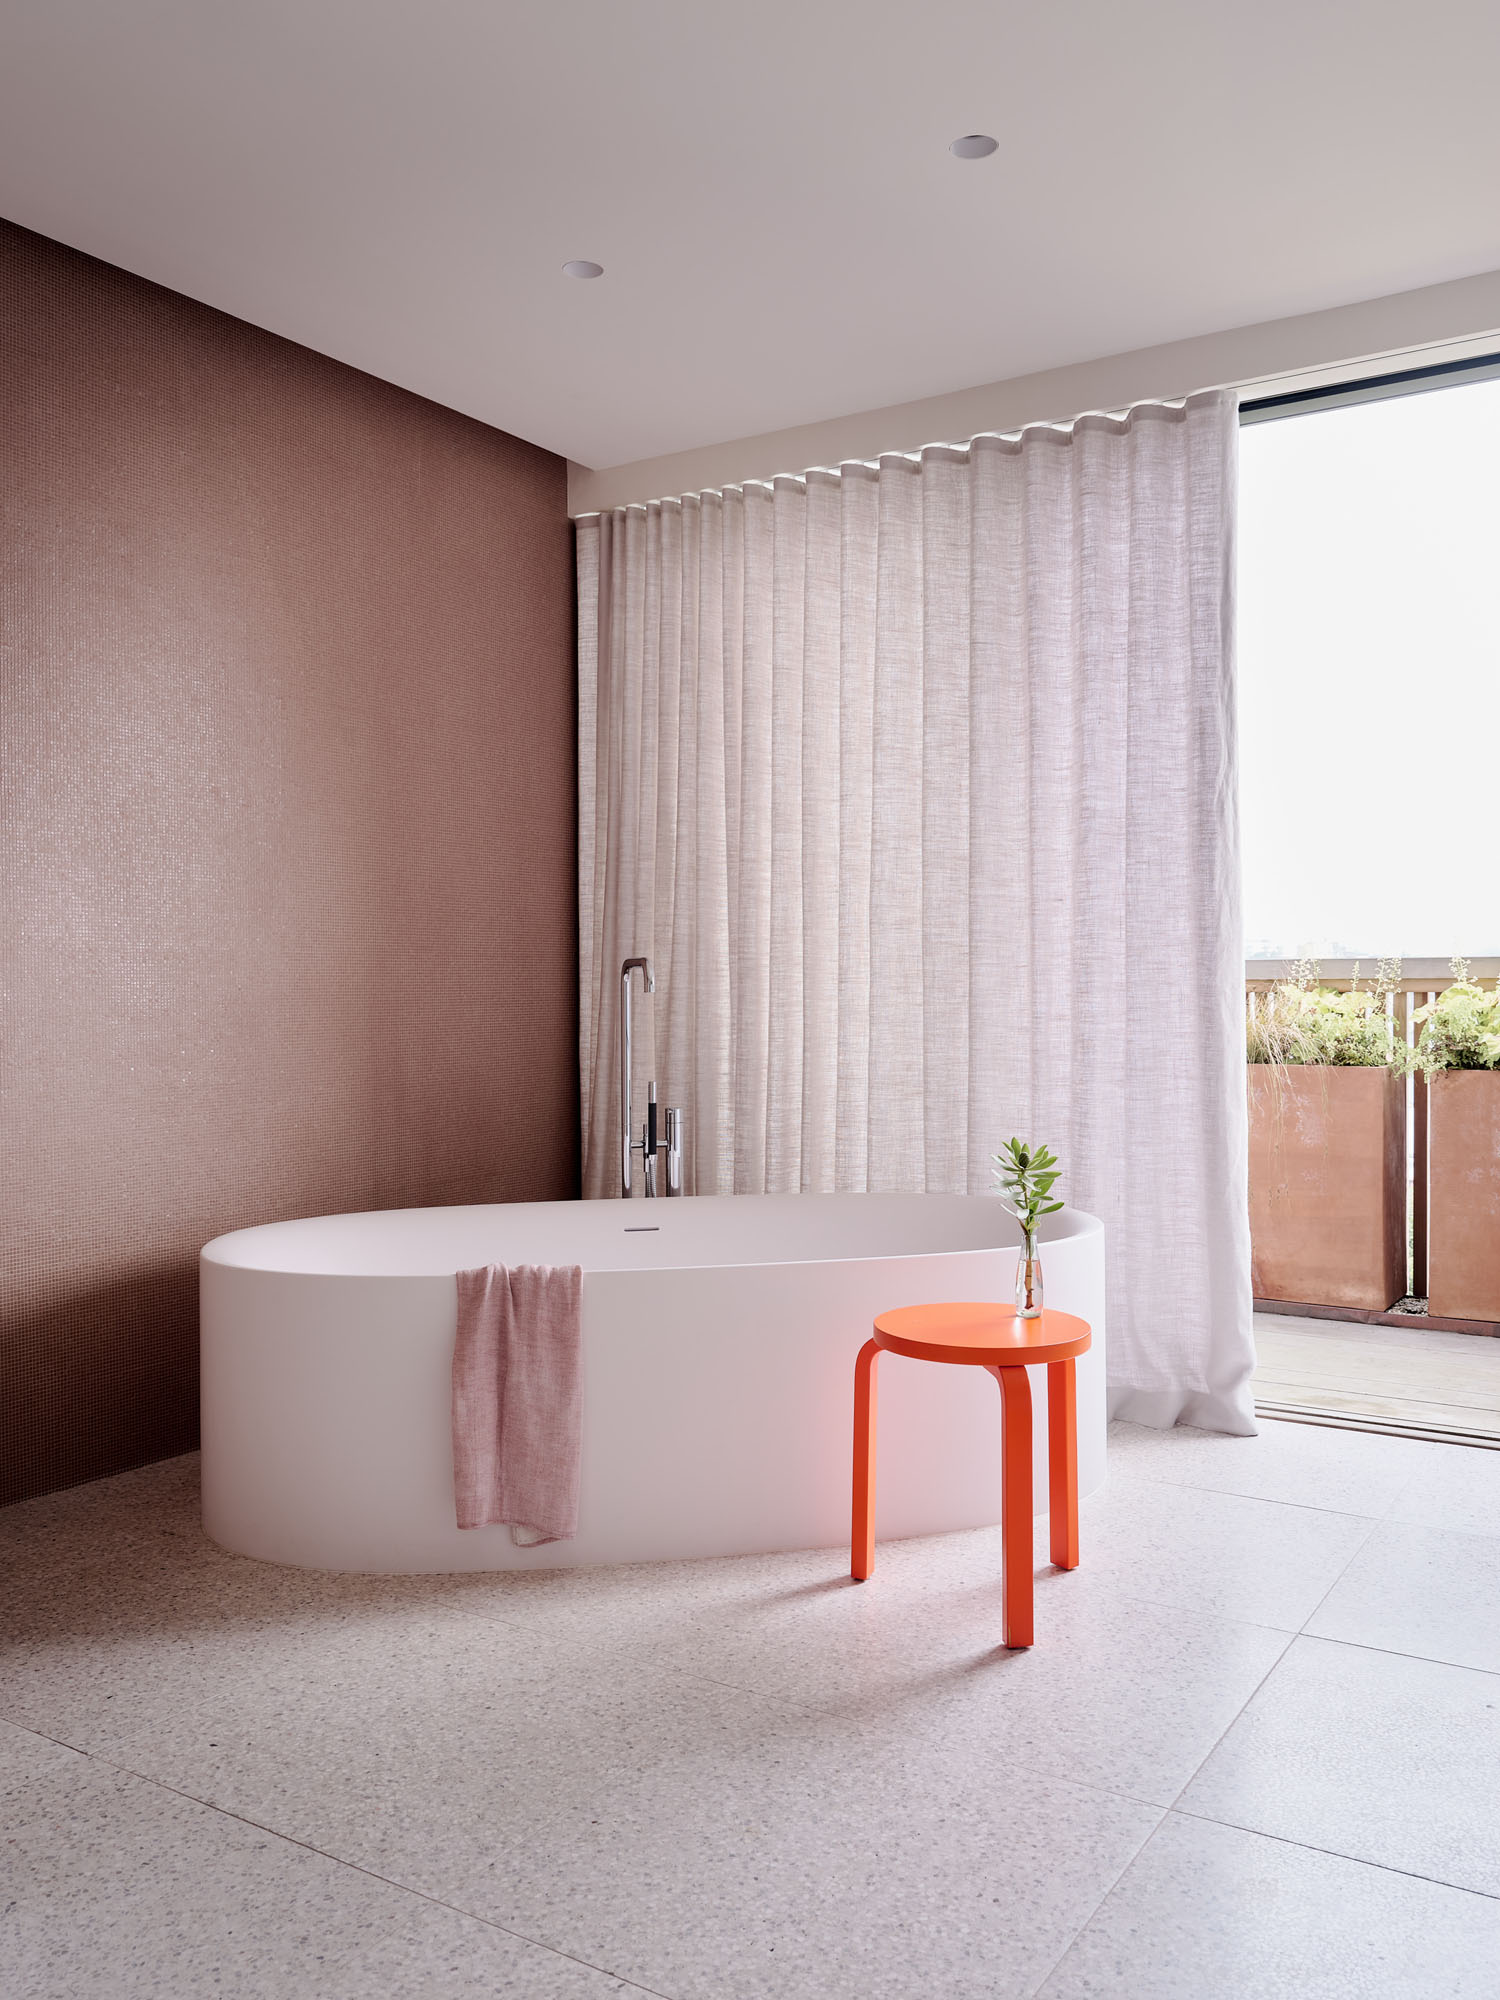 image showing a large round bathtub in a bathroom with a glass wall window